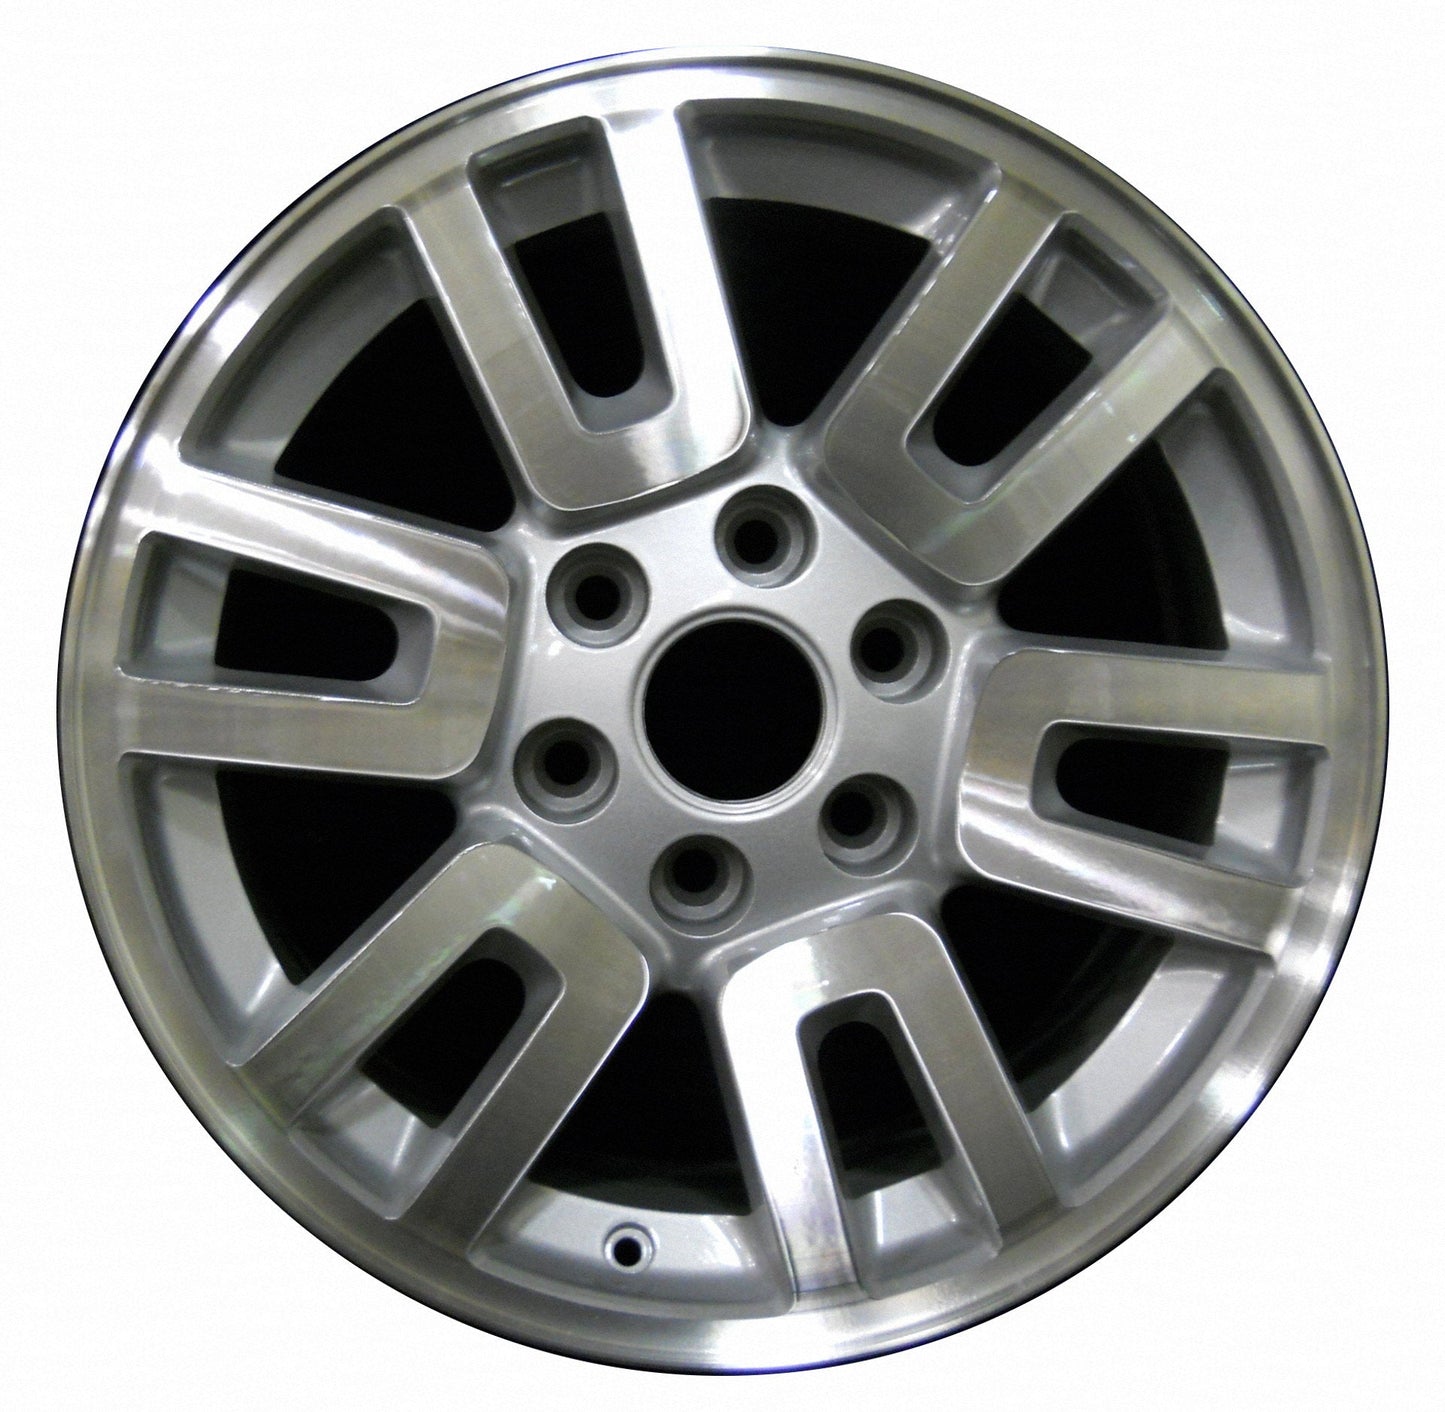 Ford Expedition  2007, 2008, 2009, 2010, 2011, 2012, 2013, 2014 Factory OEM Car Wheel Size 18x8.5 Alloy WAO.3657.PS02.TMA